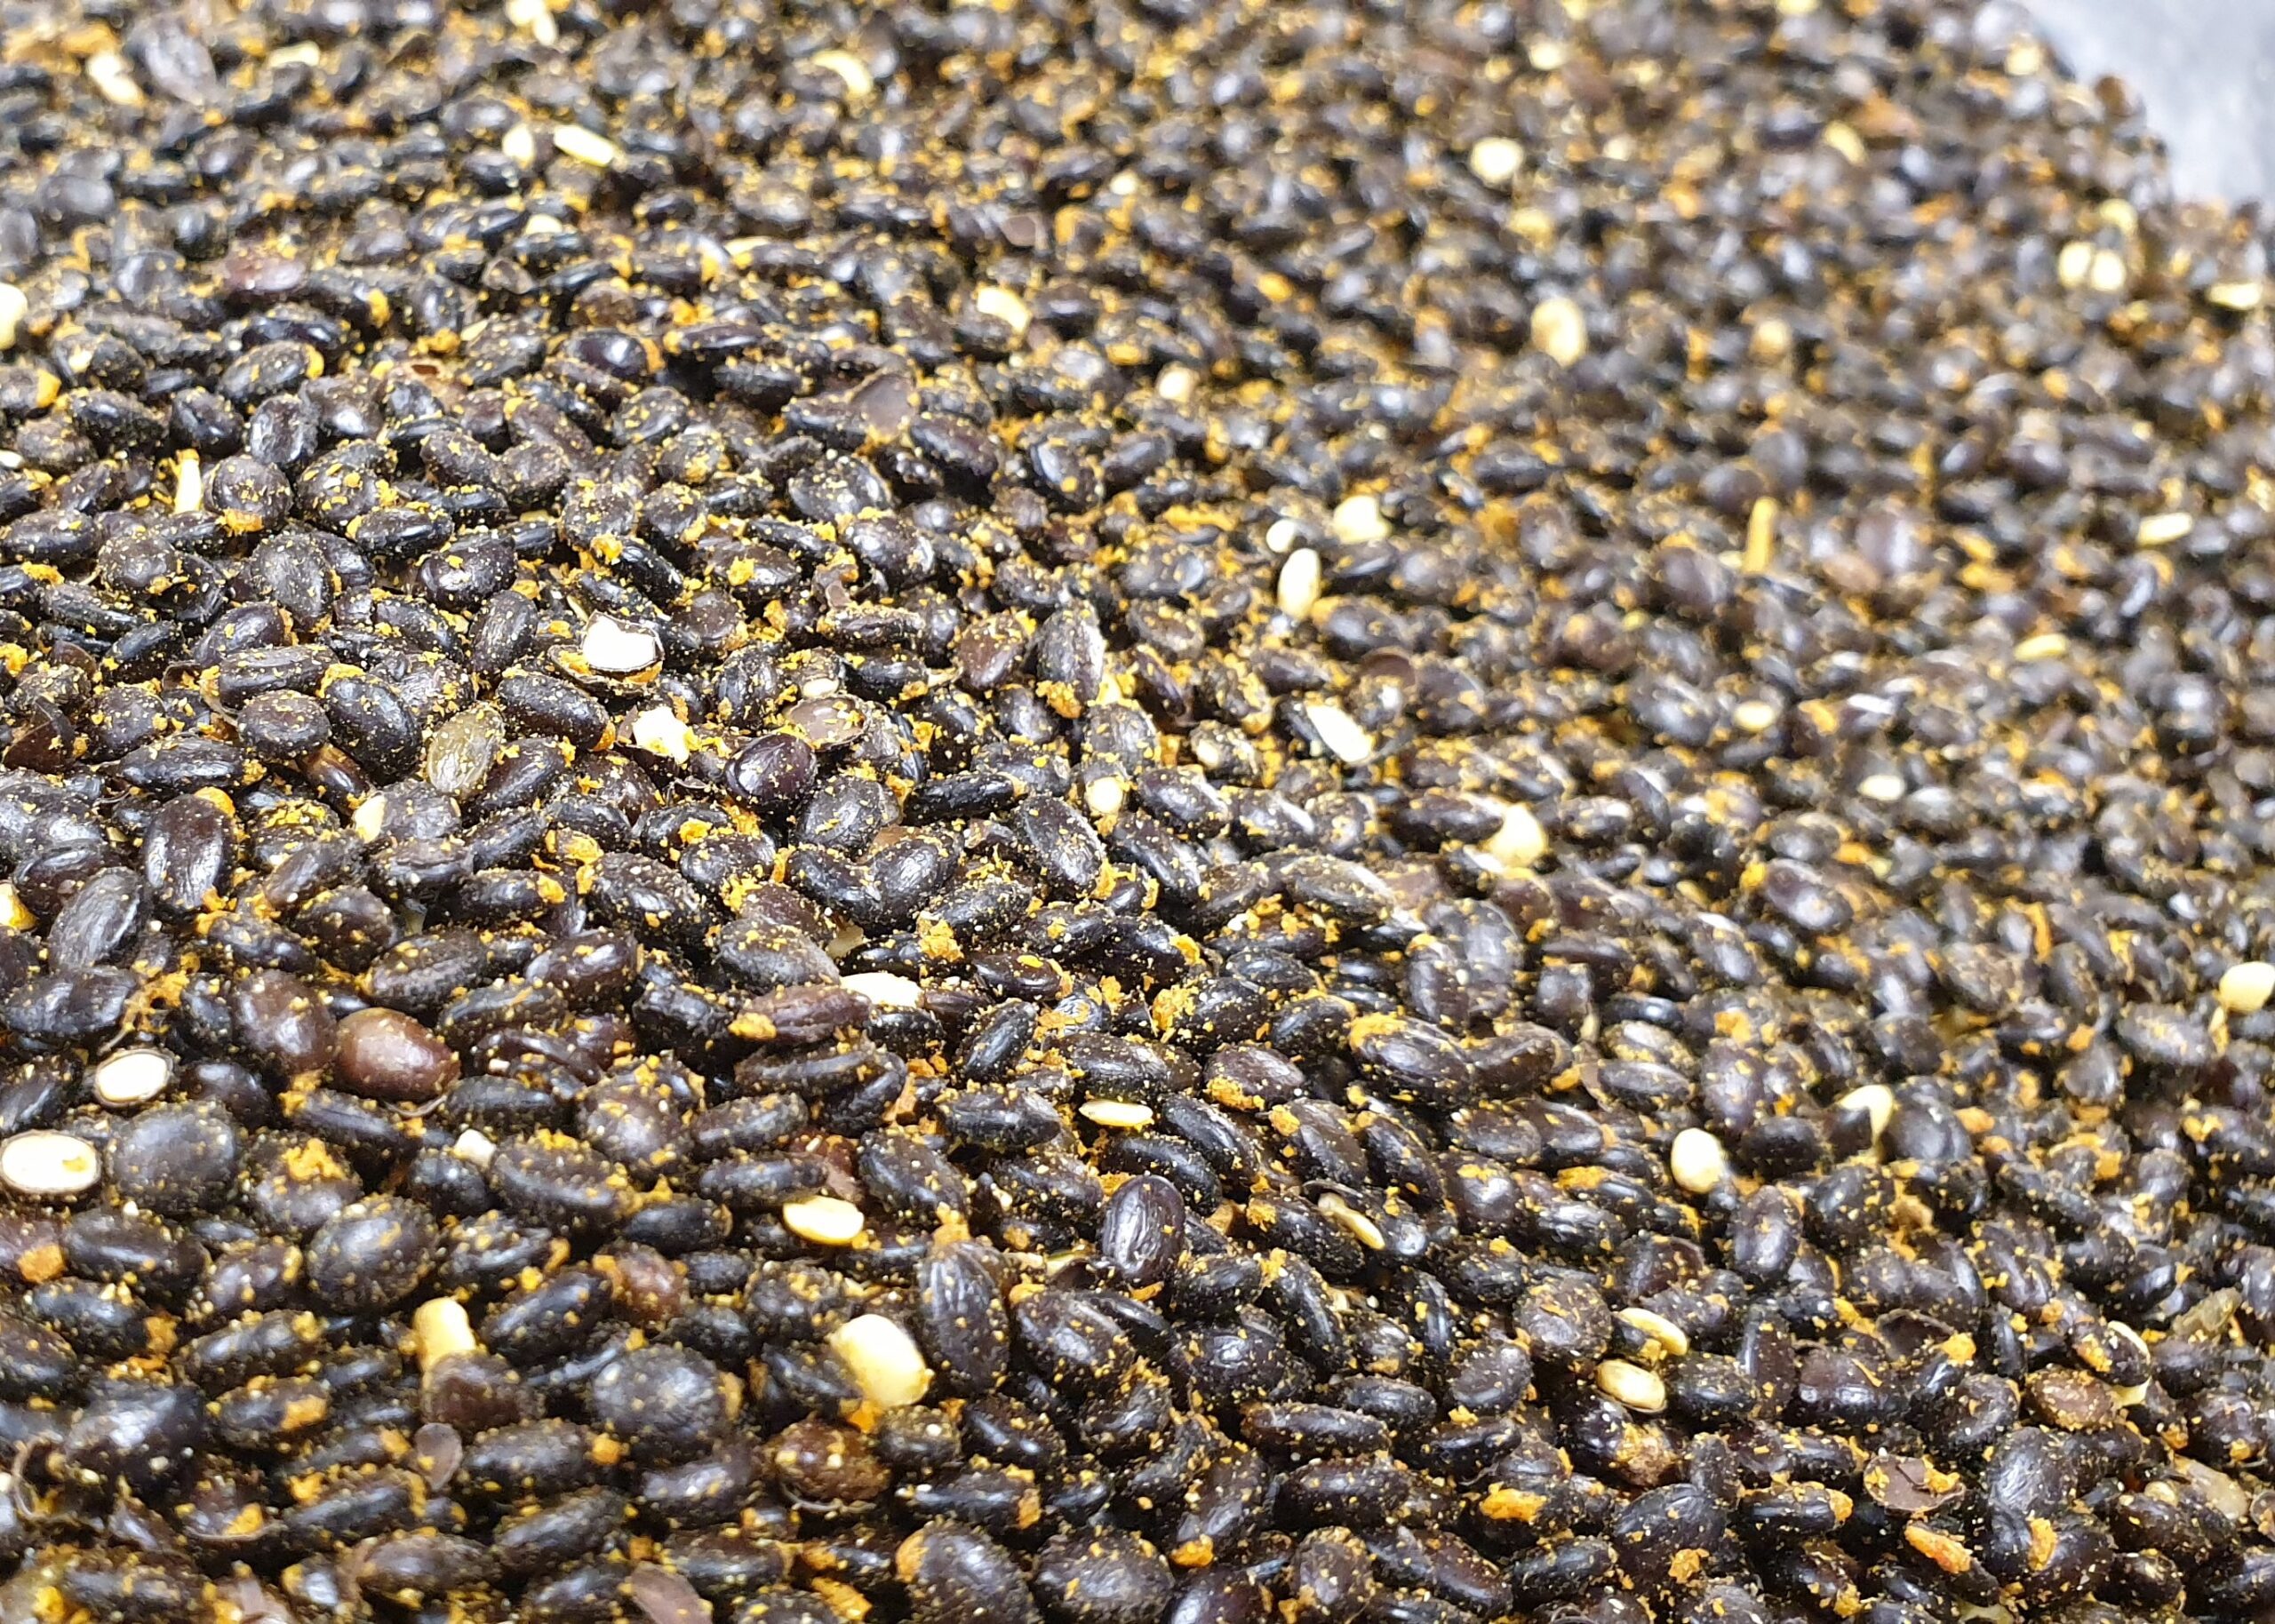 Extreme close up of native Australian seeds